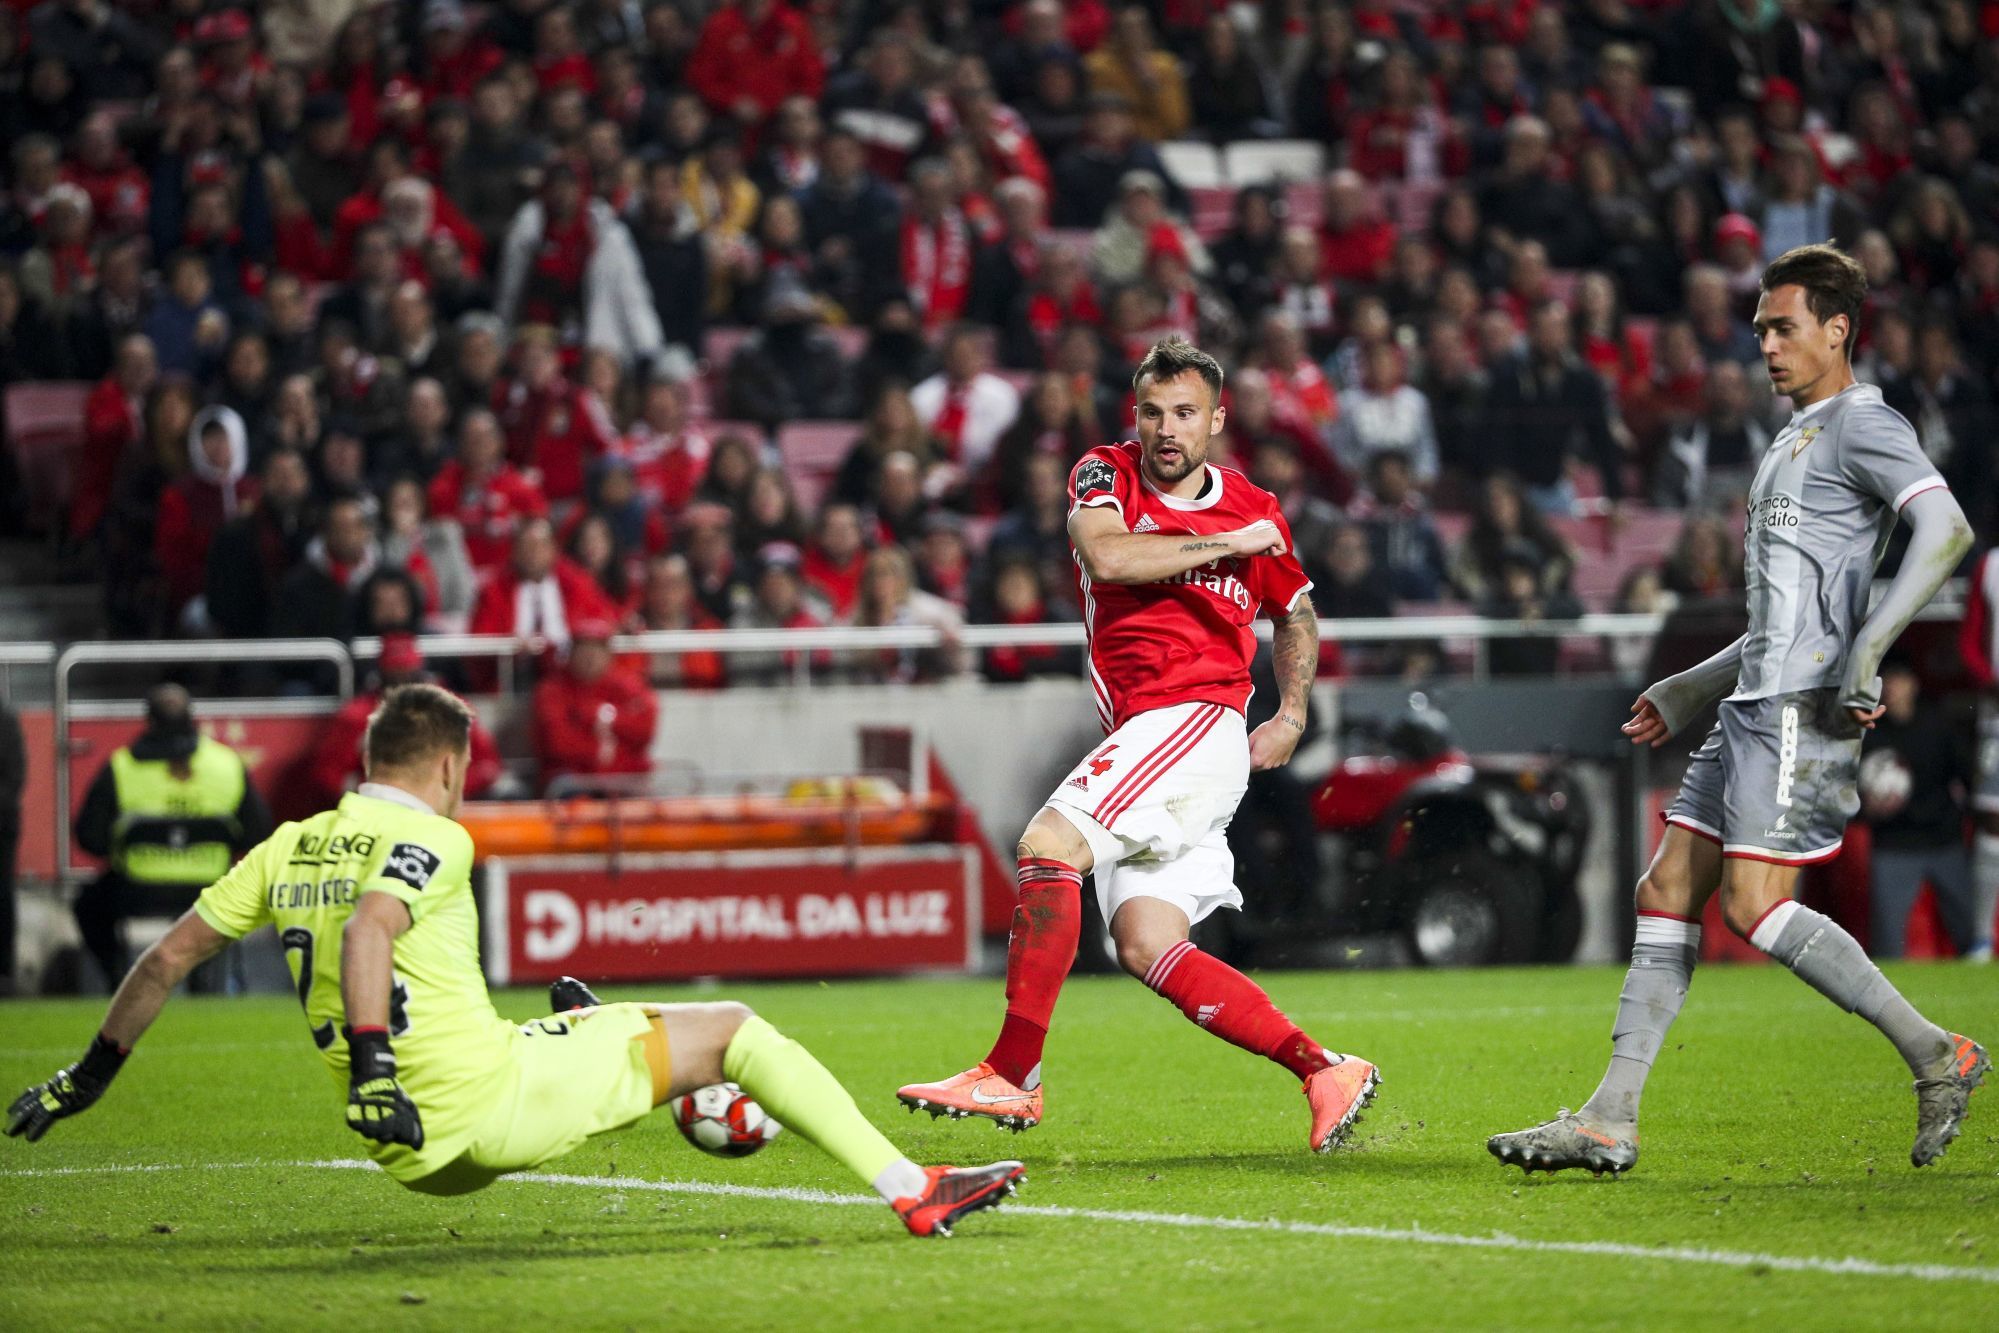 Lisbon, 01/10/2020 - Sport Lisboa e Benfica hosted this afternoon the Clube Desportivo das Aves at Estádio da Luz in Lisbon, in a match counting for the 16th Matchday 2019/20. Quentin Beunardeau, Haris Seferovic, Ricardo Mangas (Filipe Amorim / Global Images) 

Photo by Icon Sport - Haris SEFEROVIC - Quentin BEUNARDEAU - Estàdio da Luz - Lisbonne (Portugal)